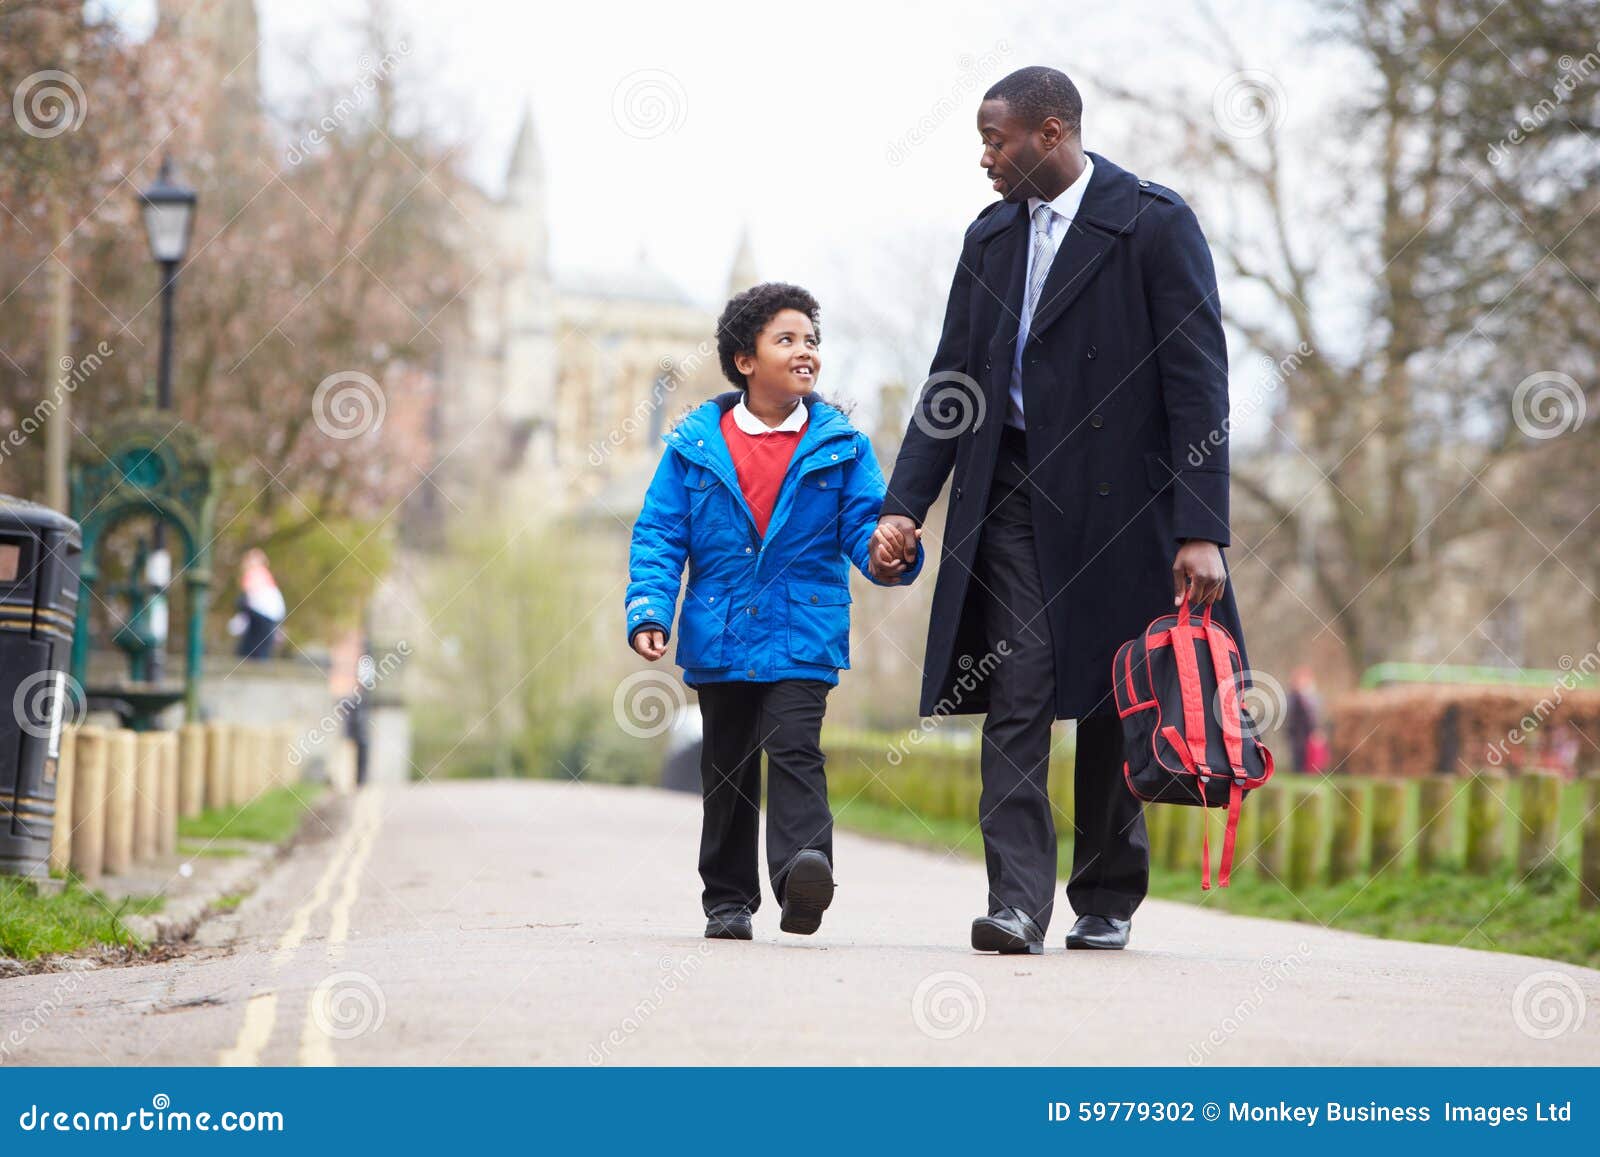 father walking son to school along path